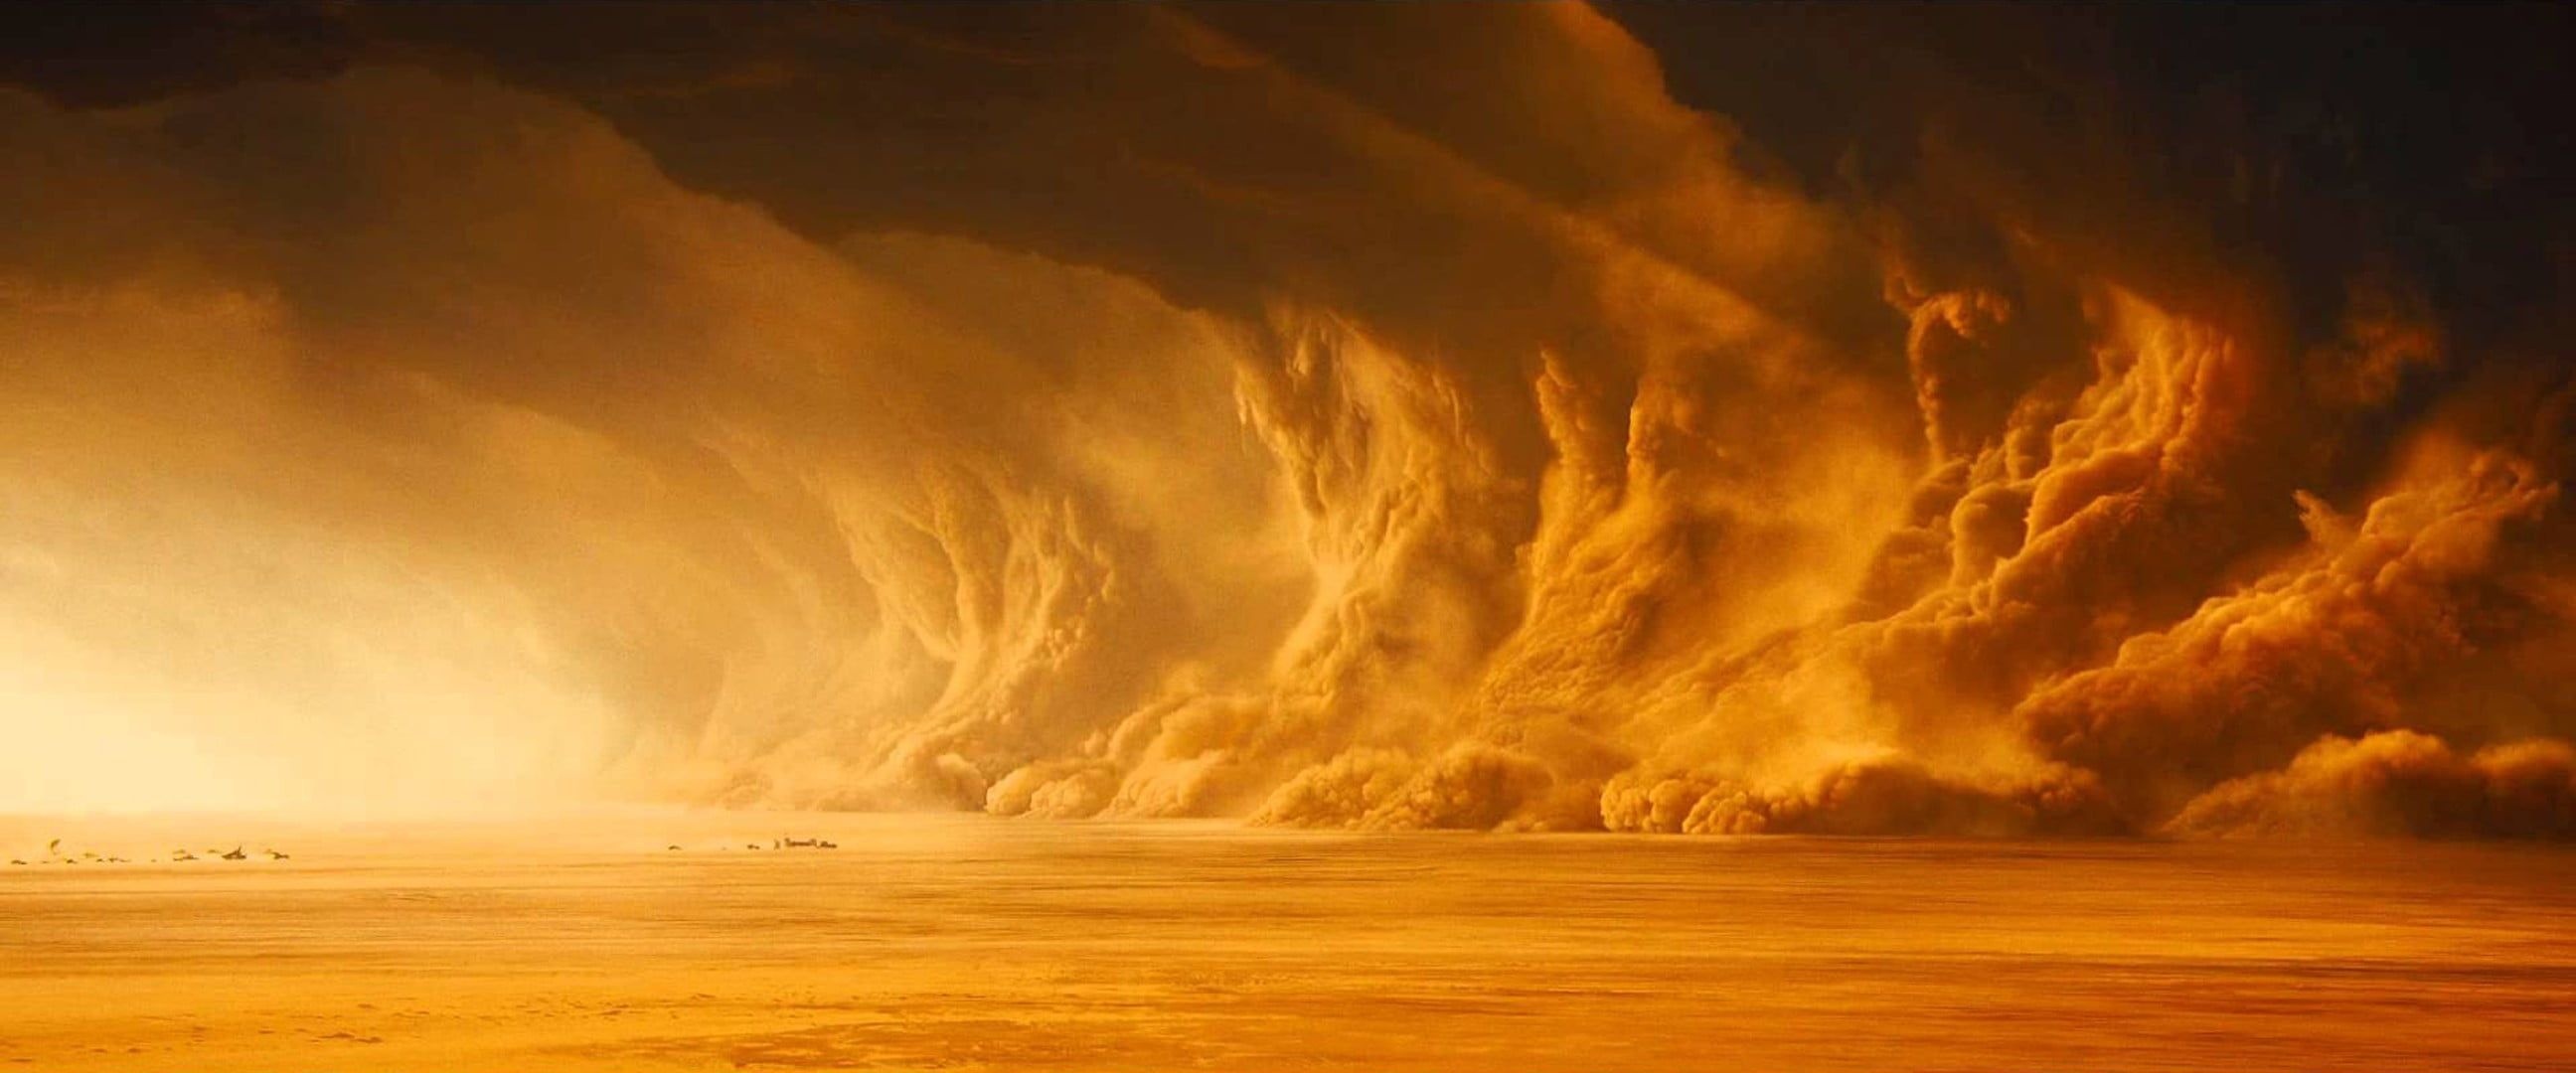 Mad Max: Fury Road: Named one of the ten best films of 2015 by the American Film Institute. 2600x1080 Dual Screen Background.